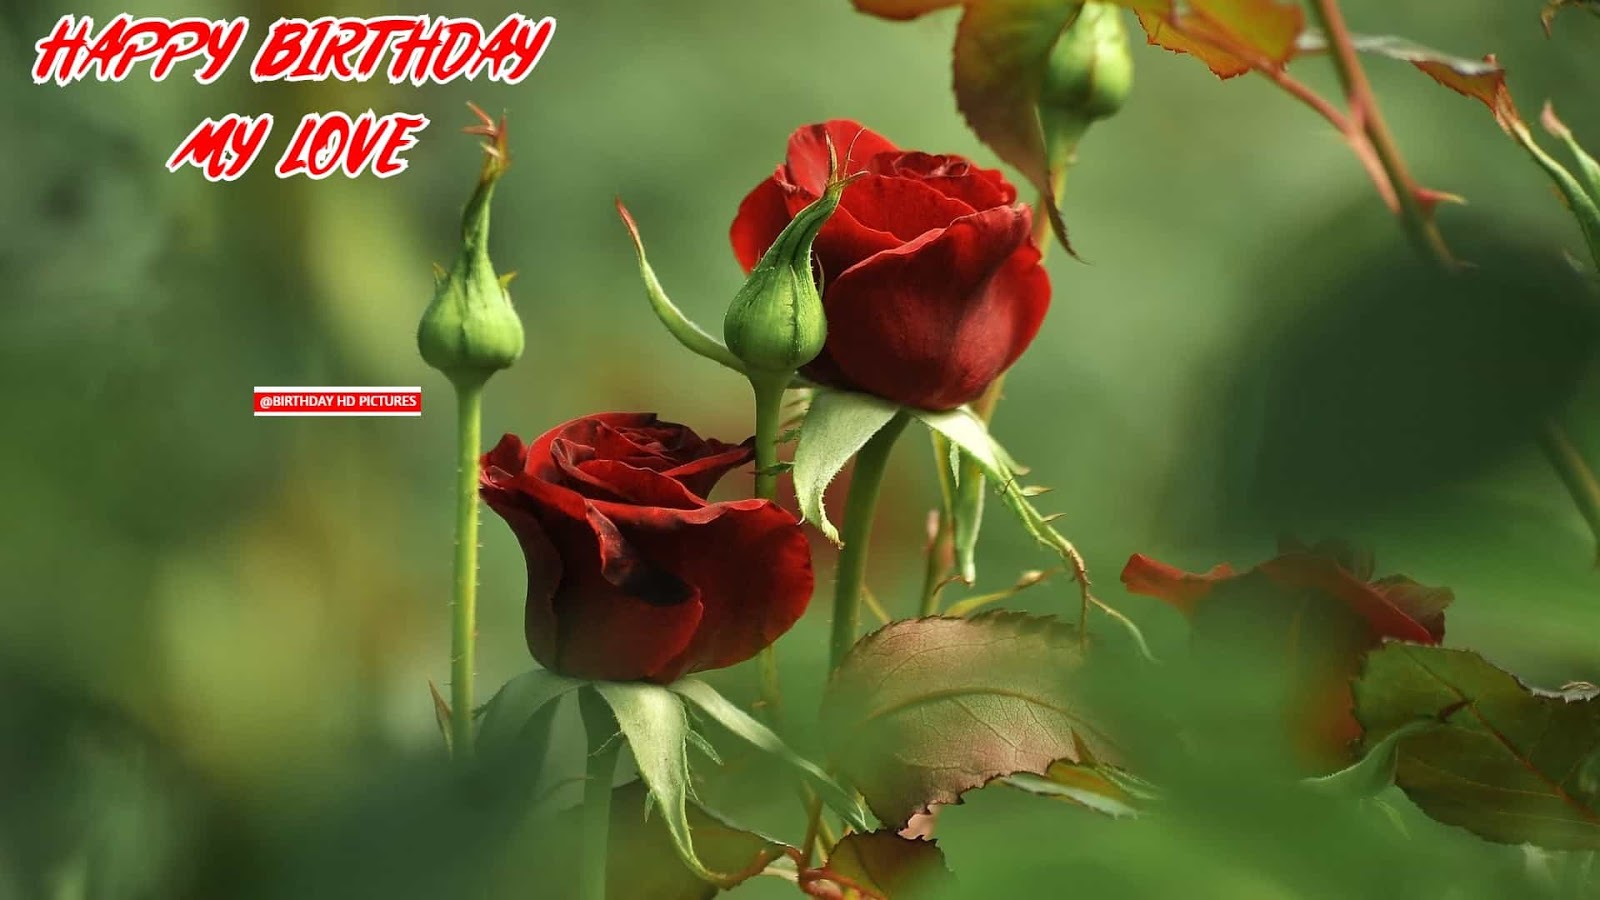 Wallpaper Of Happy Birthday On Birthday Hd Pictures - Love Couple Roses - HD Wallpaper 